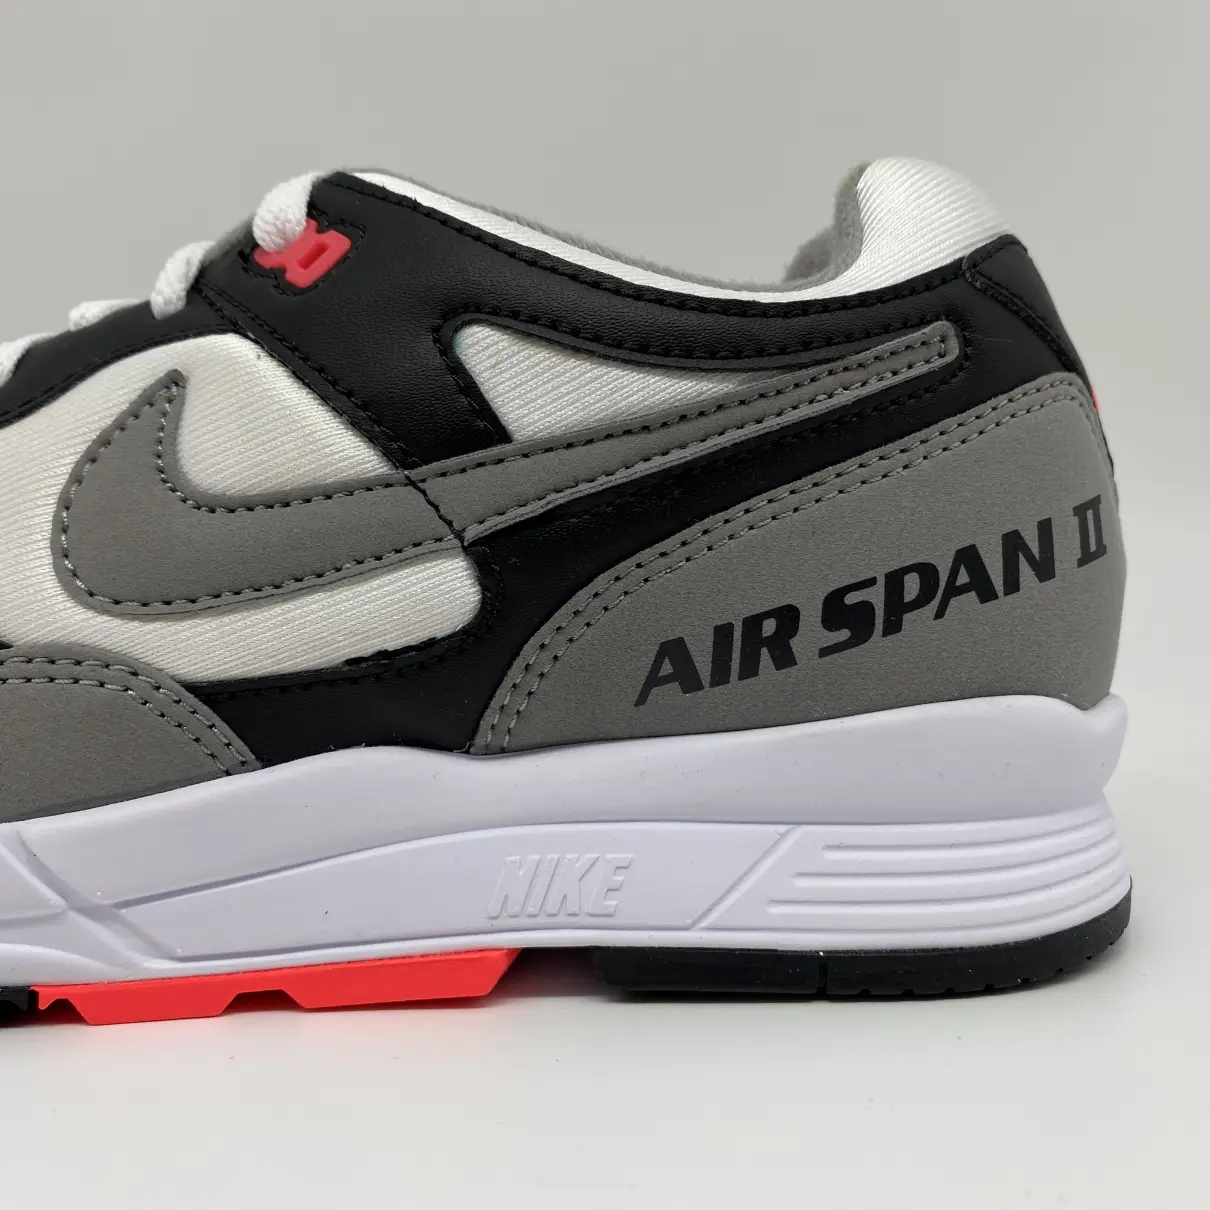 Air Span II leather low trainers Nike